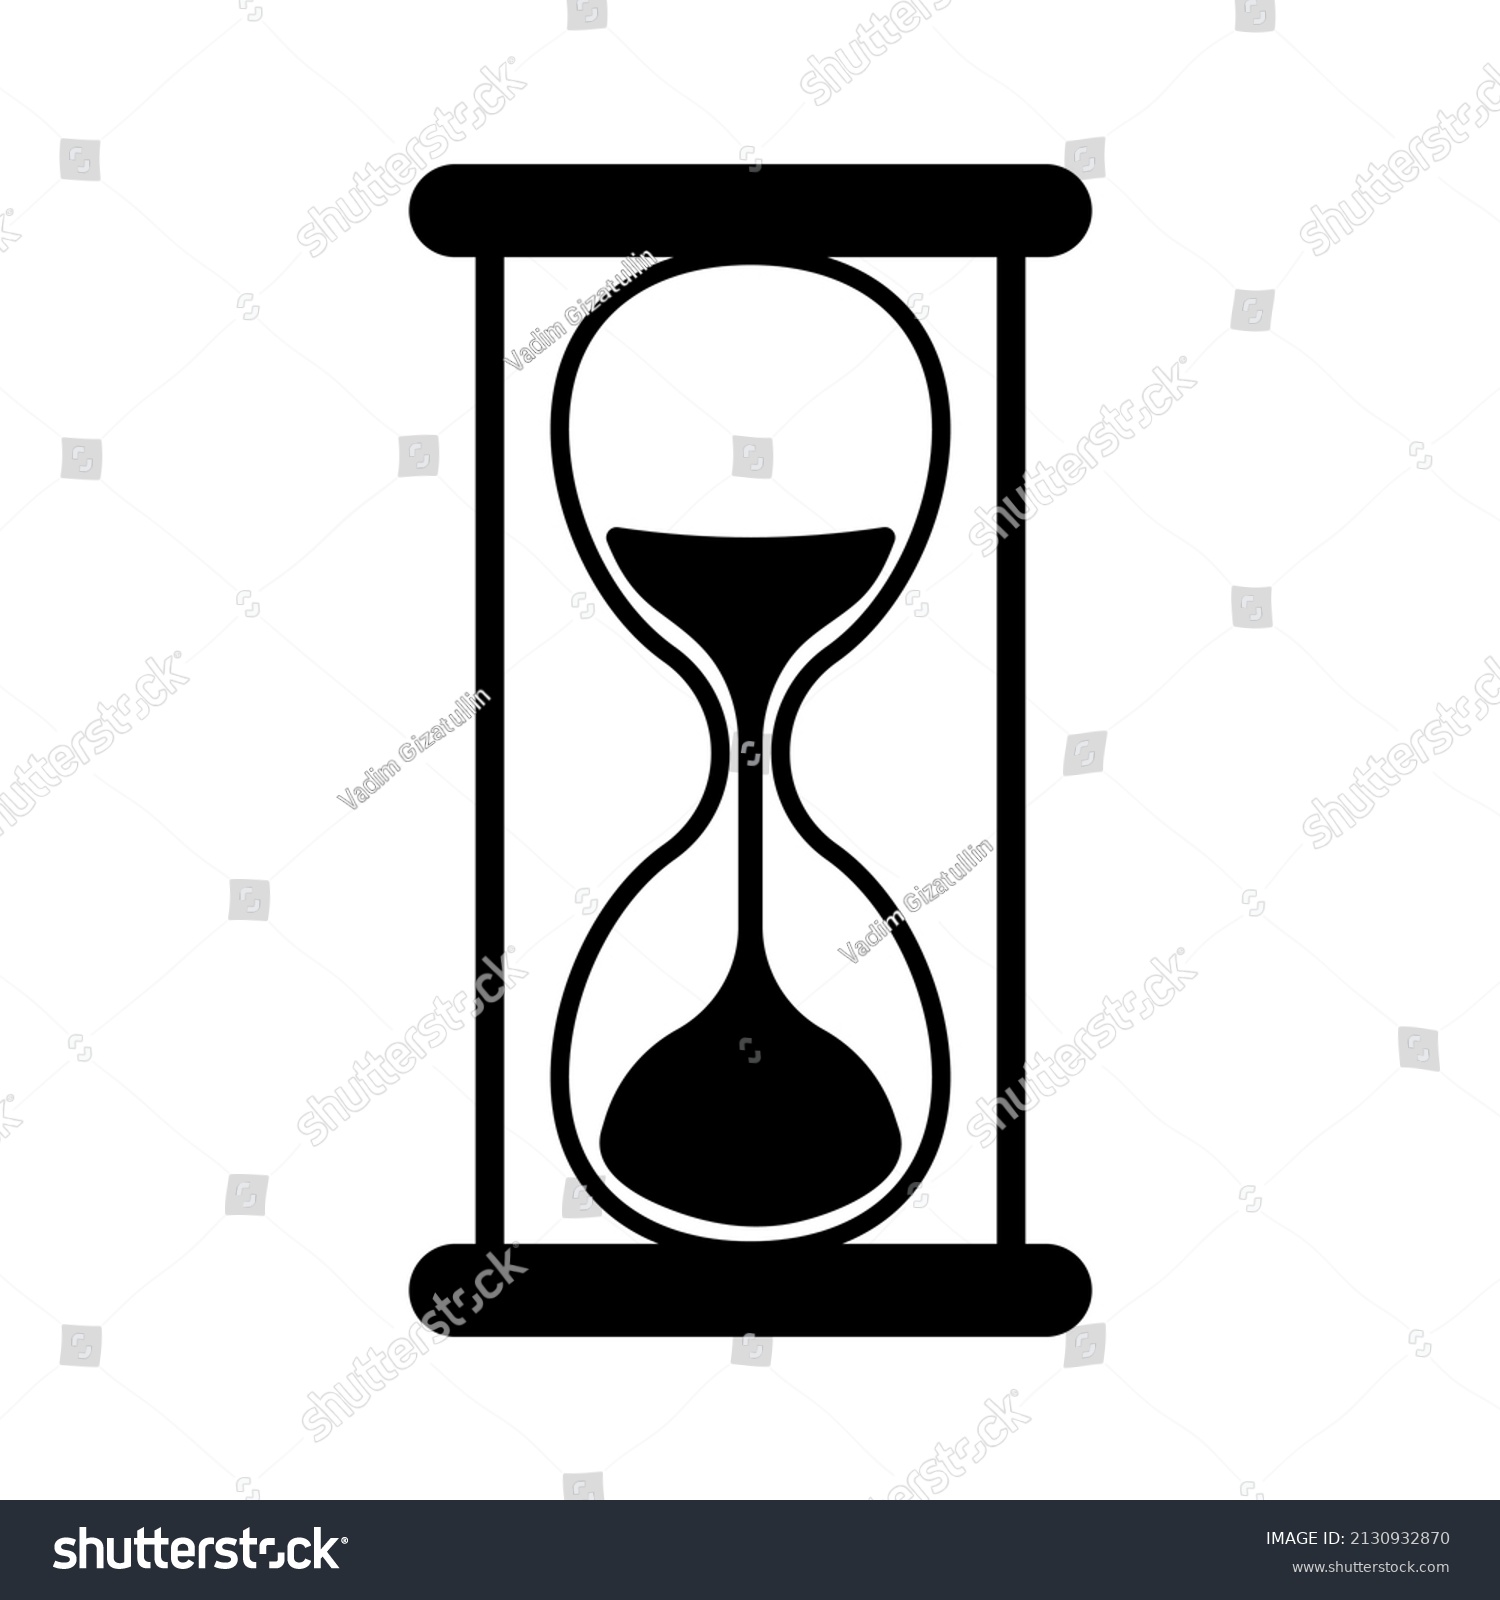 Silhouette Hourglass Measure Time Stopwatch Hourglass Stock Vector Royalty Free 2130932870 3039